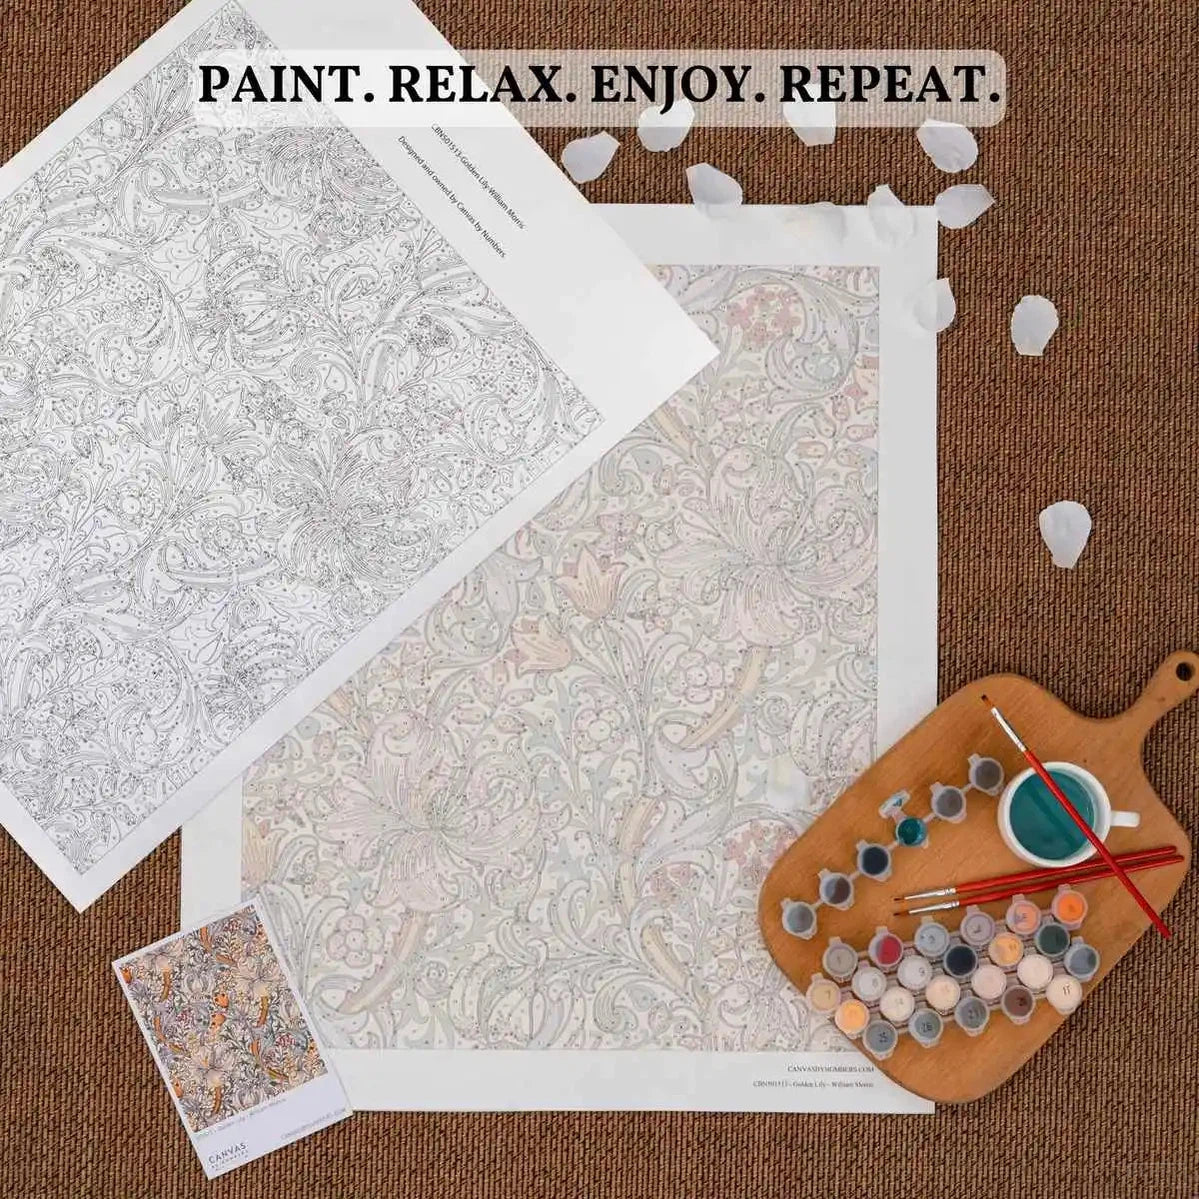 Primrose - Paint by Numbers-A female portrait paint by numbers by Alphonse Mucha, a reference to the Art Nouveau movement. Enjoy paint by numbers done right! Rated excellent in Trustpilot.-Canvas by Numbers